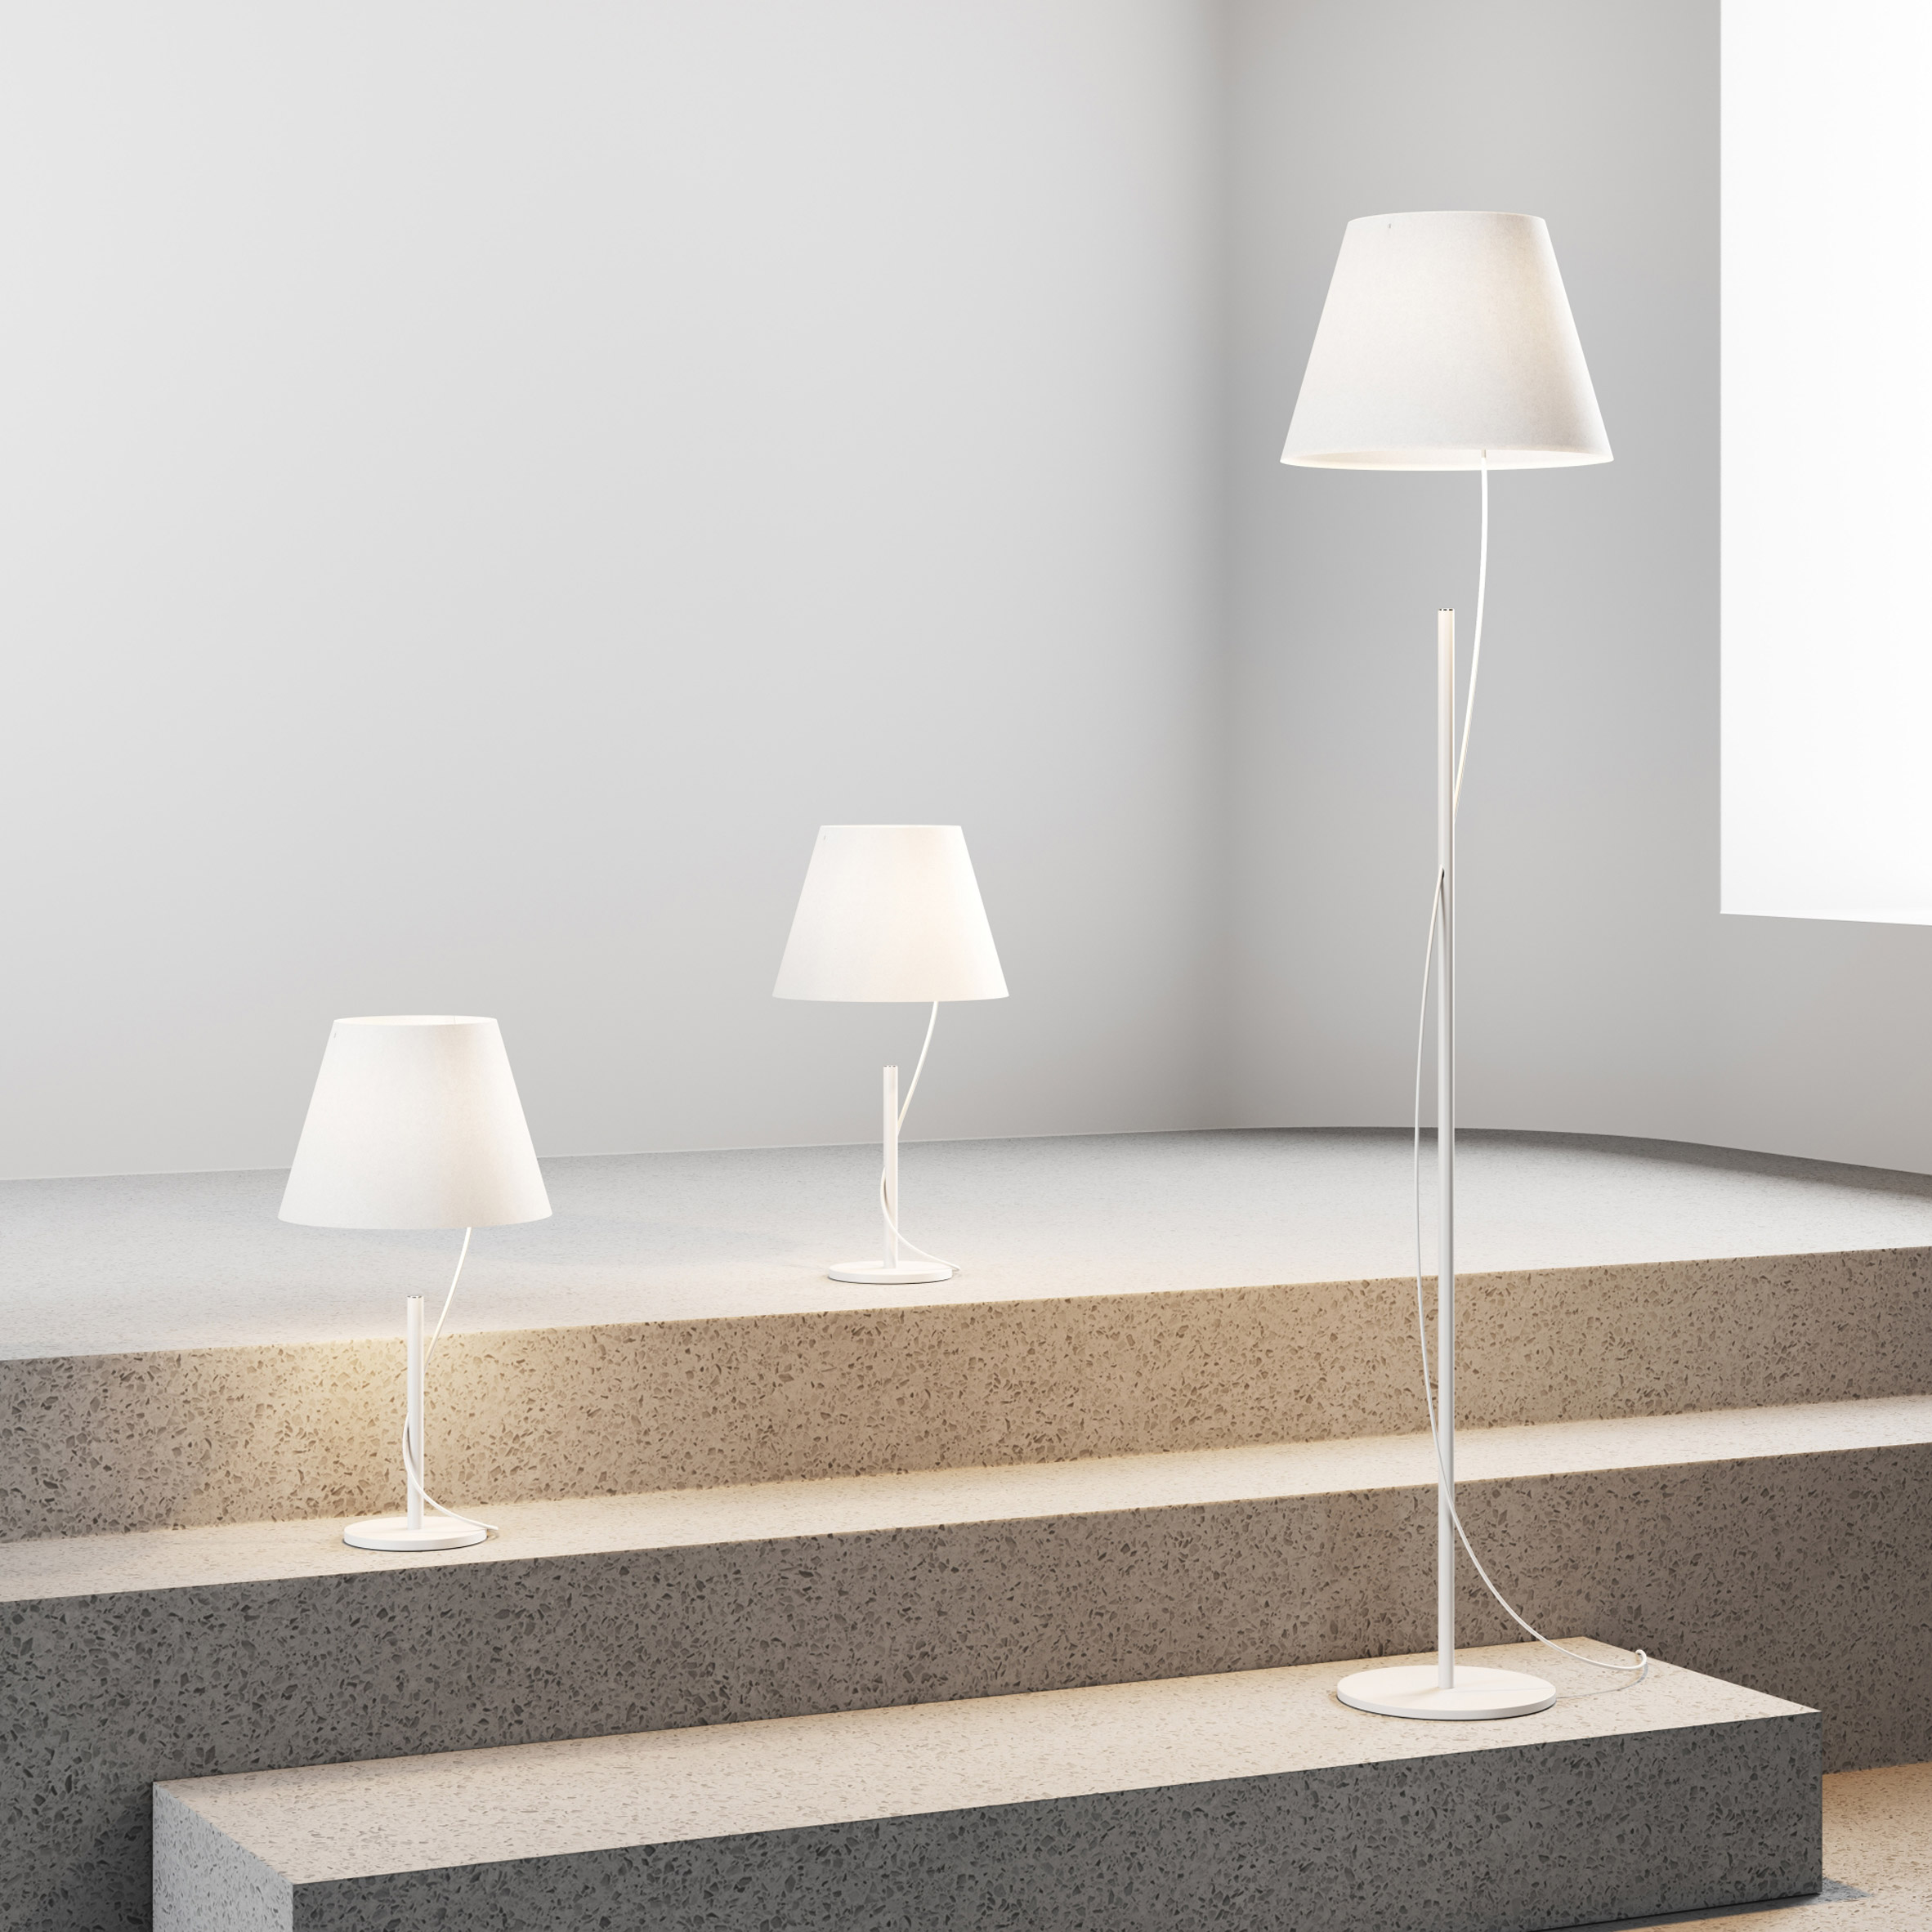 Three hover lamps displayed on stairs